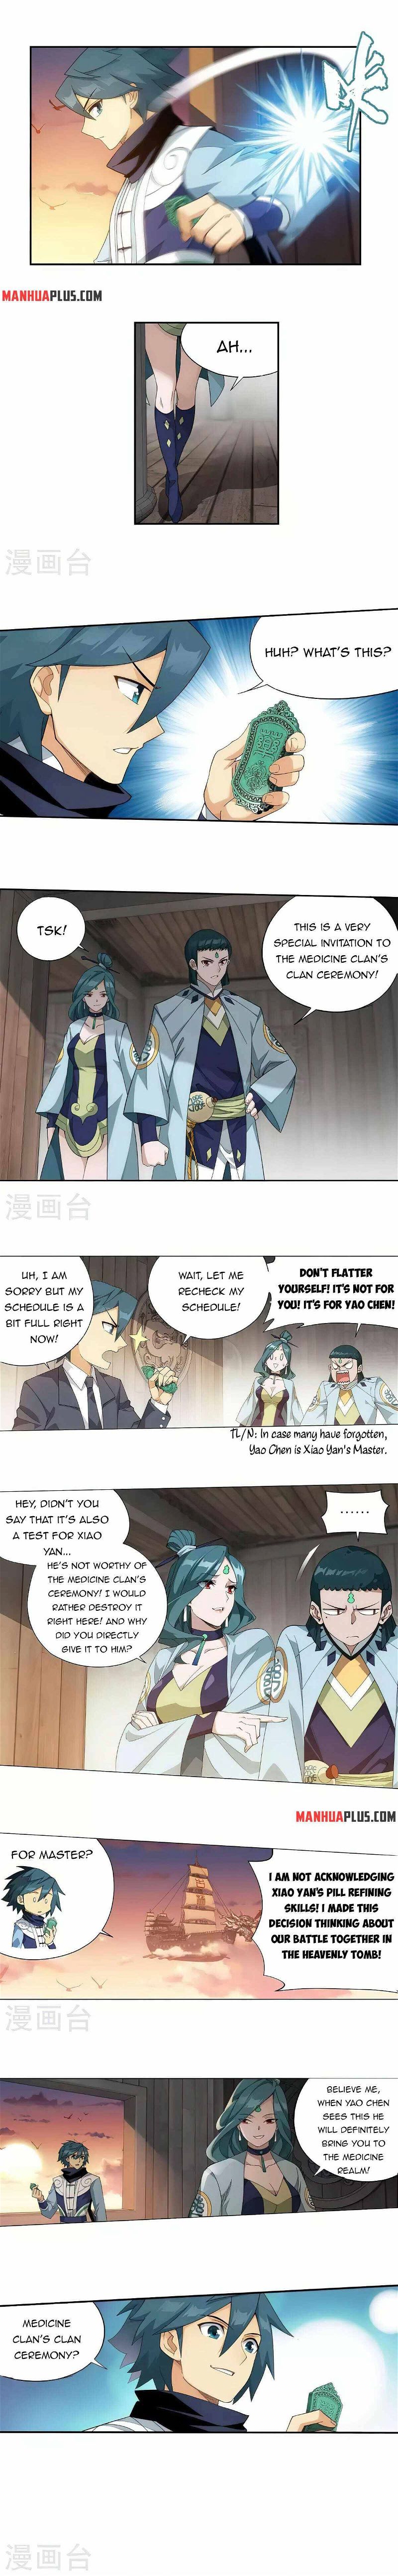 Doupo Cangqiong Chapter 356 page 8